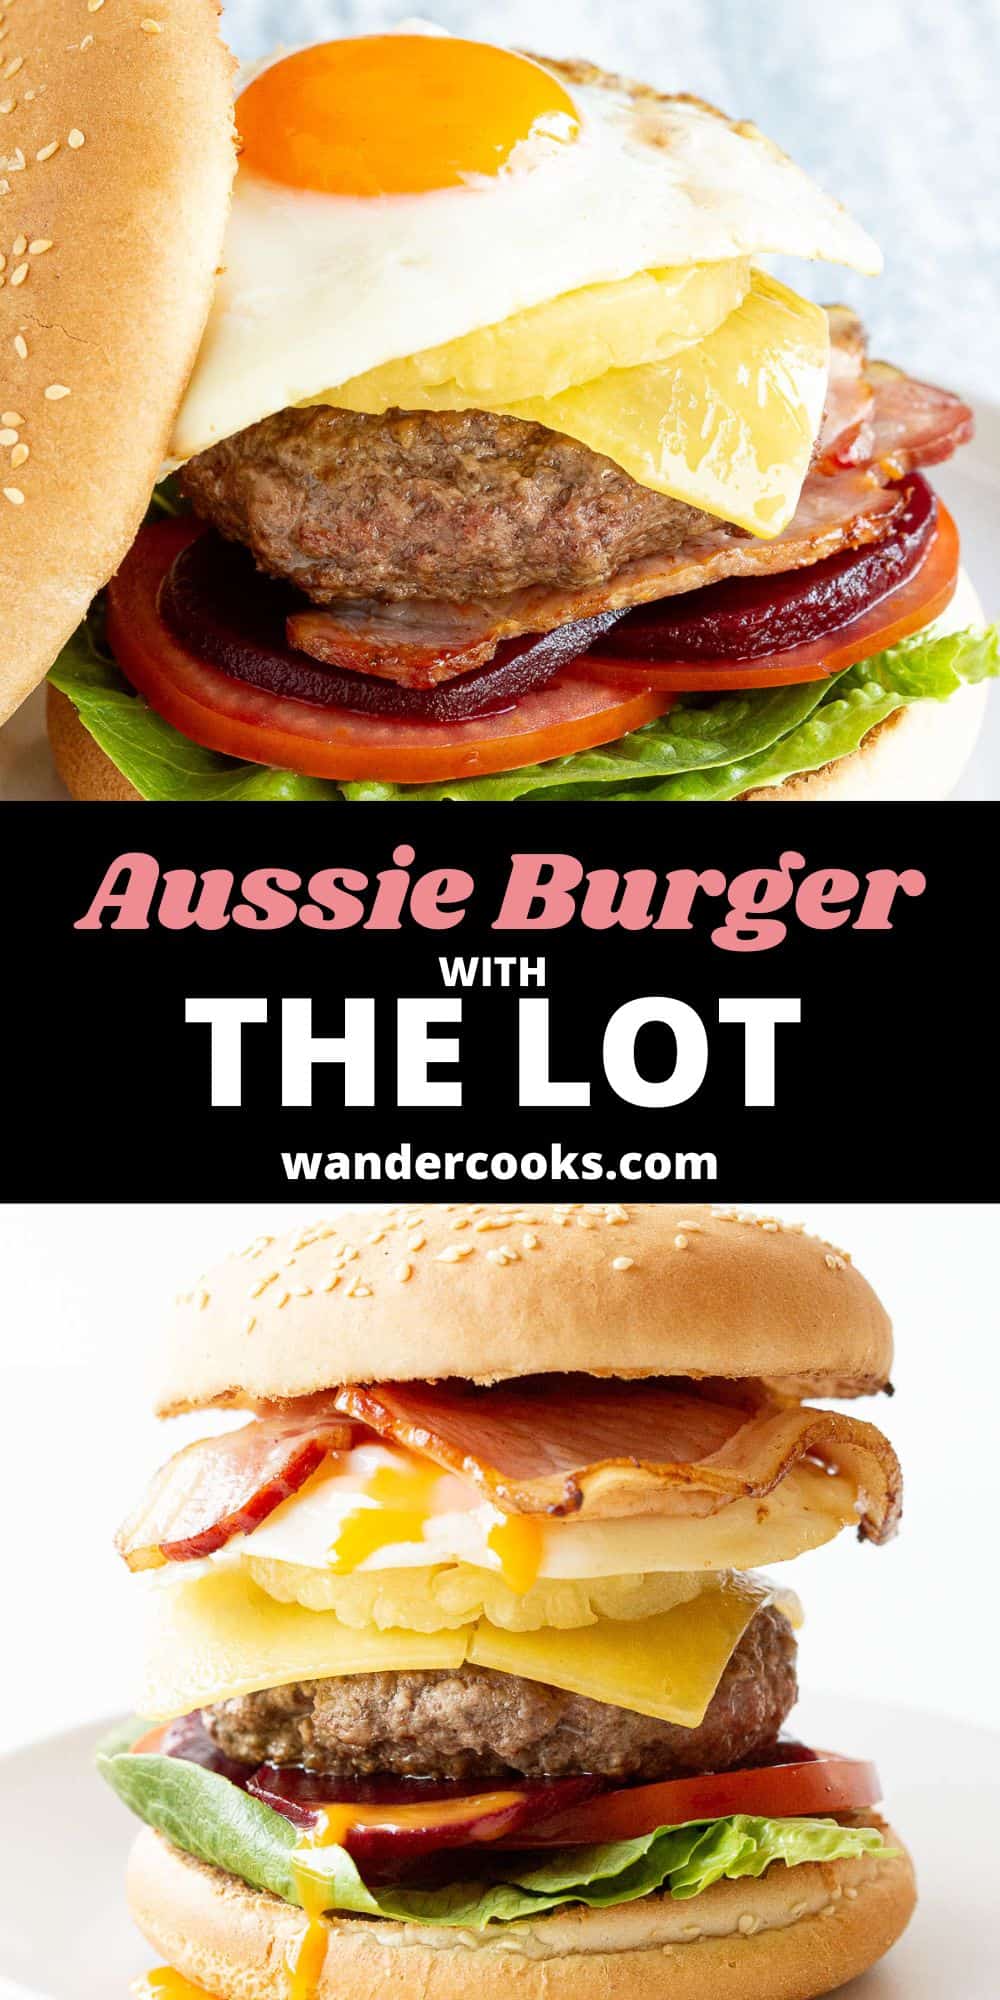 Aussie Burger with The Lot